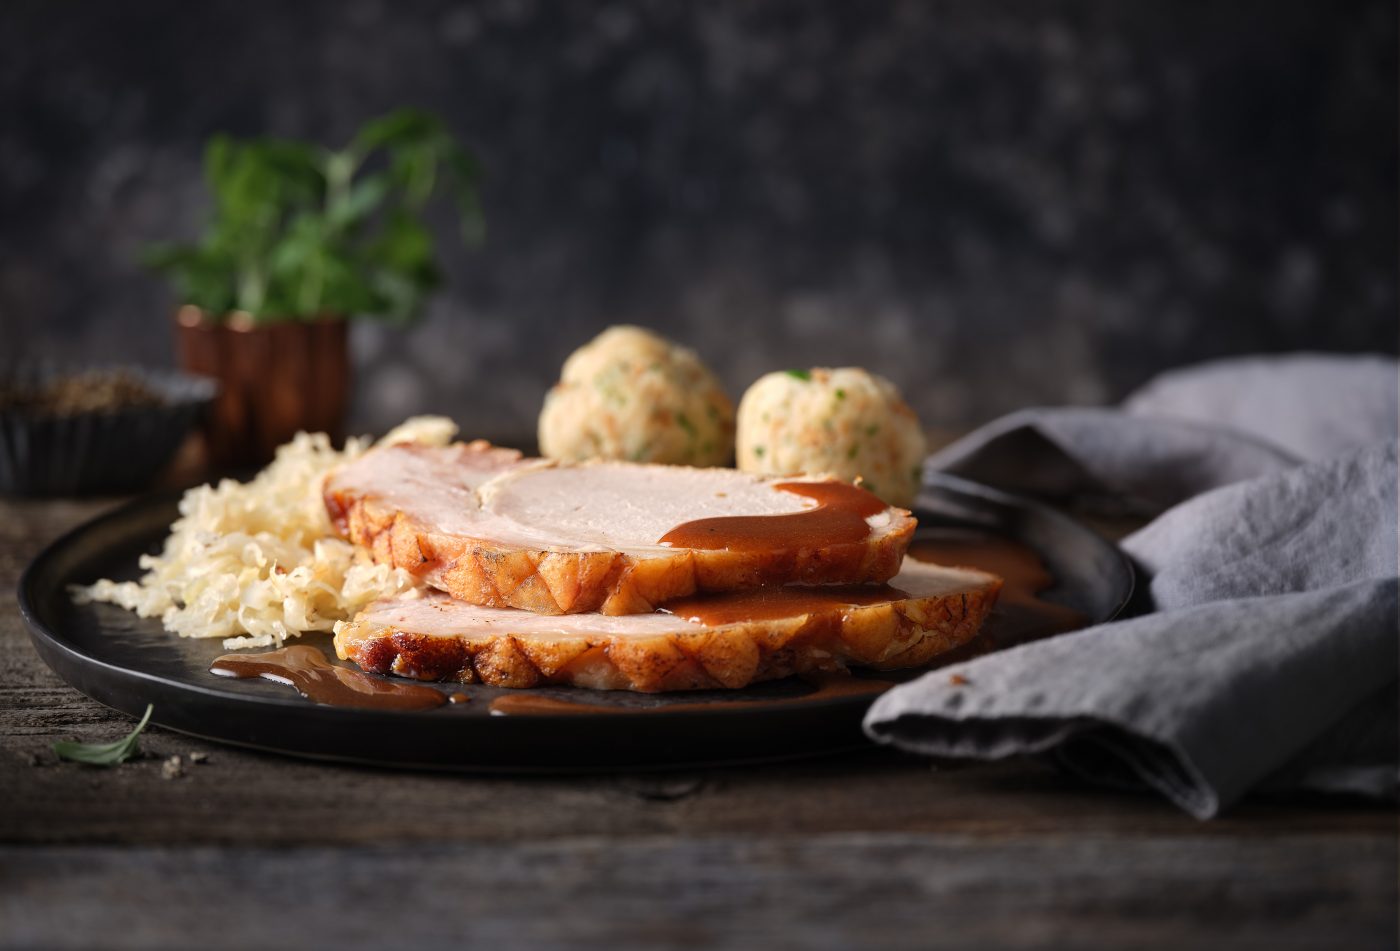 Photo for menuboard with roast pork and dumplings. The dark plate stands in a setting of weathered wood